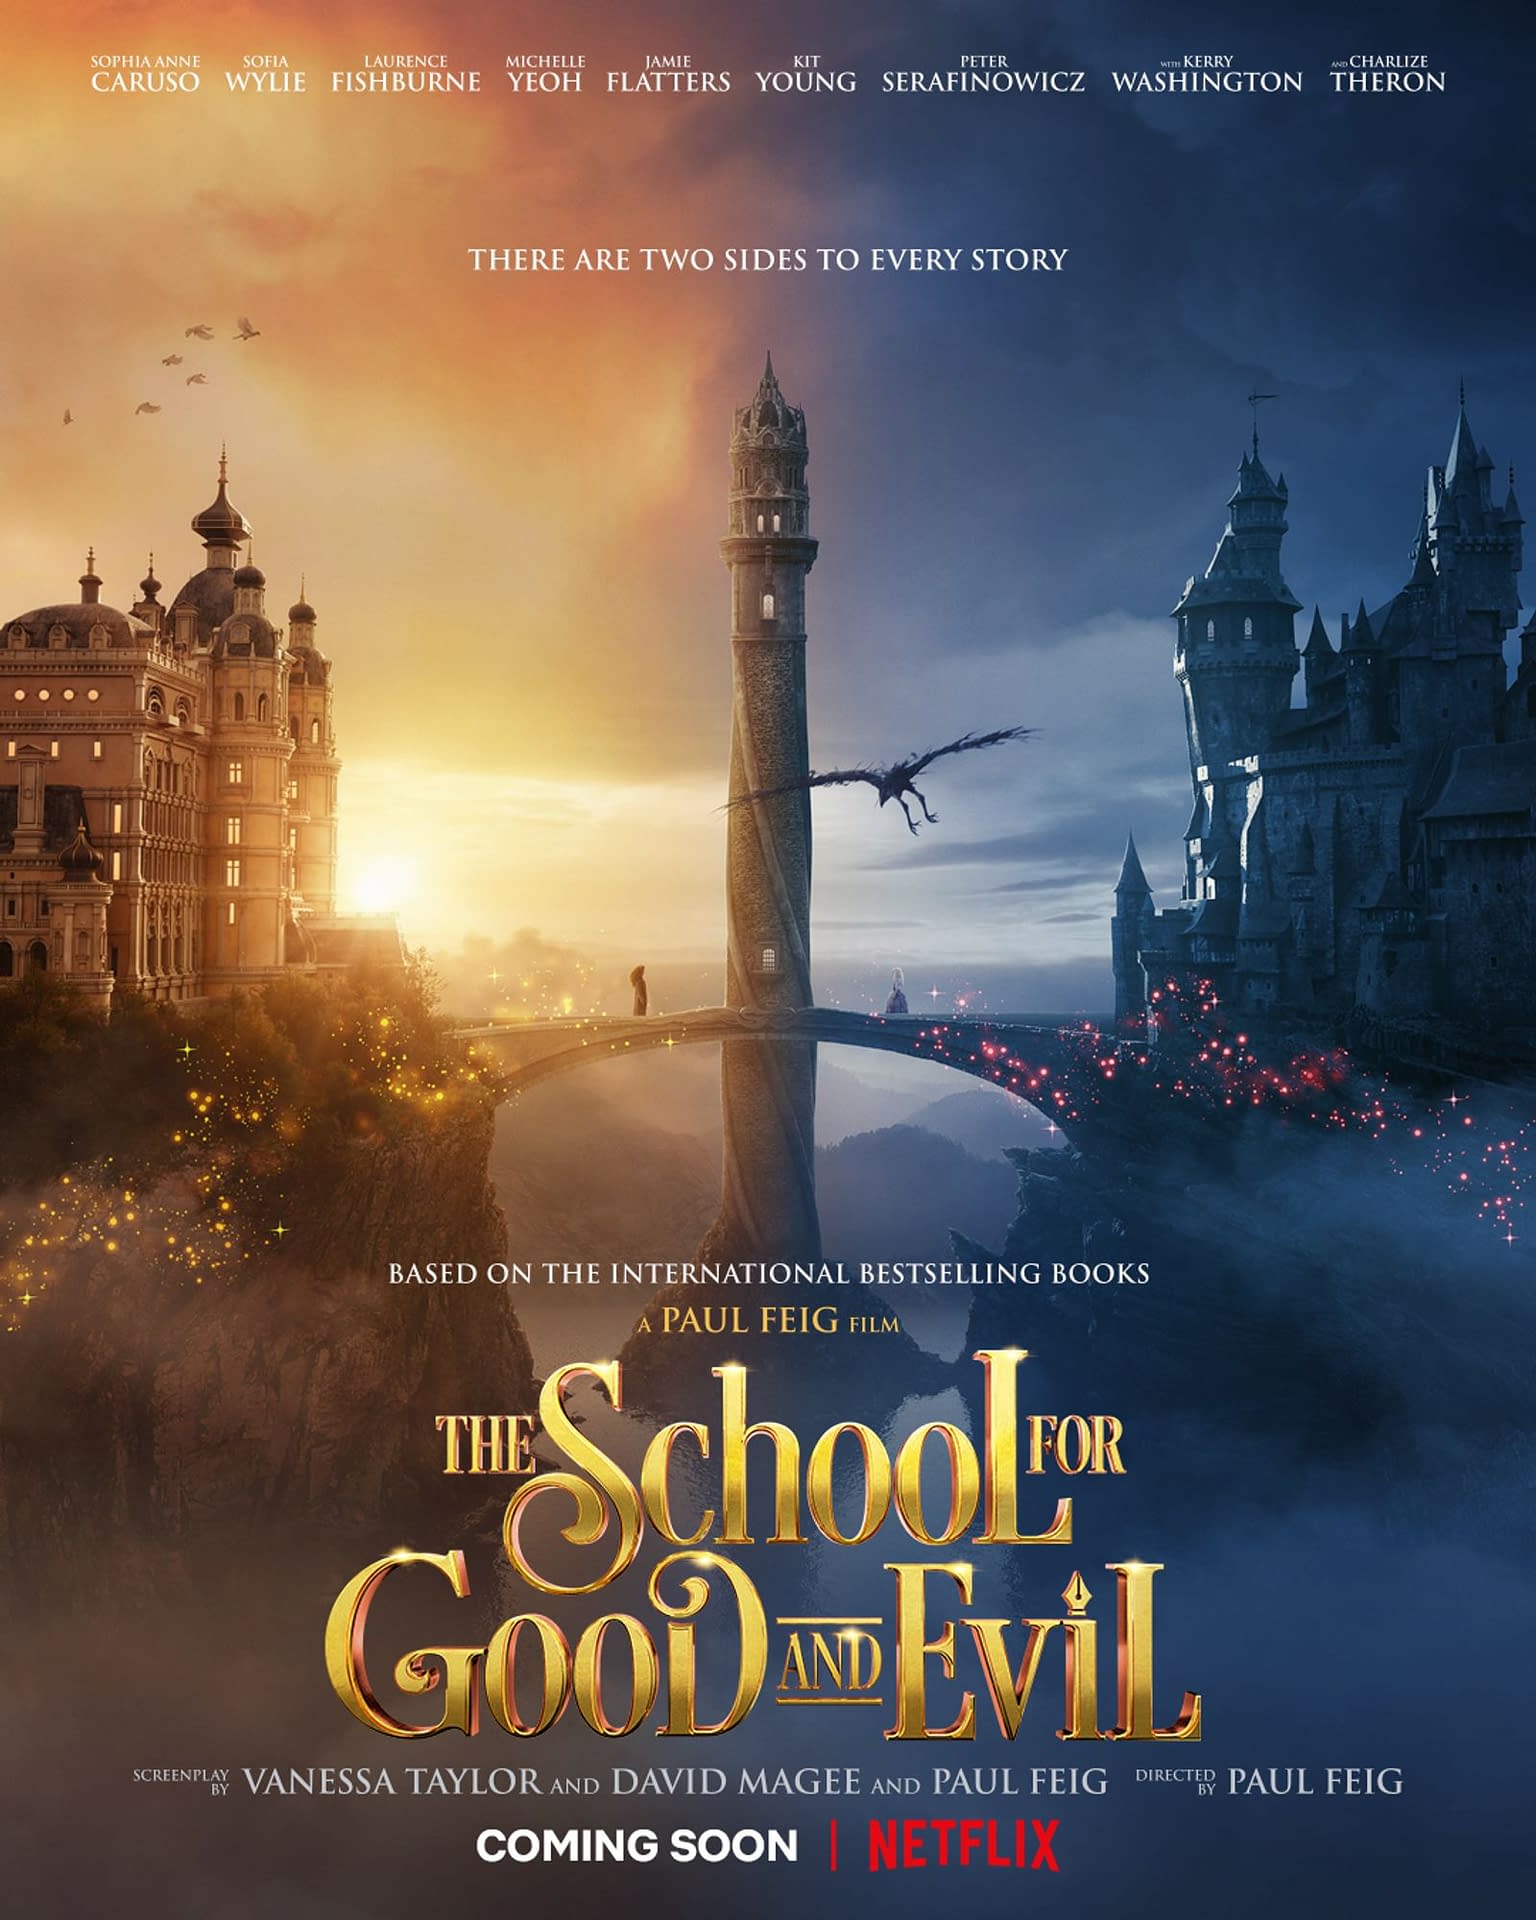 The School for Good and Evil Teaser Trailer is Released